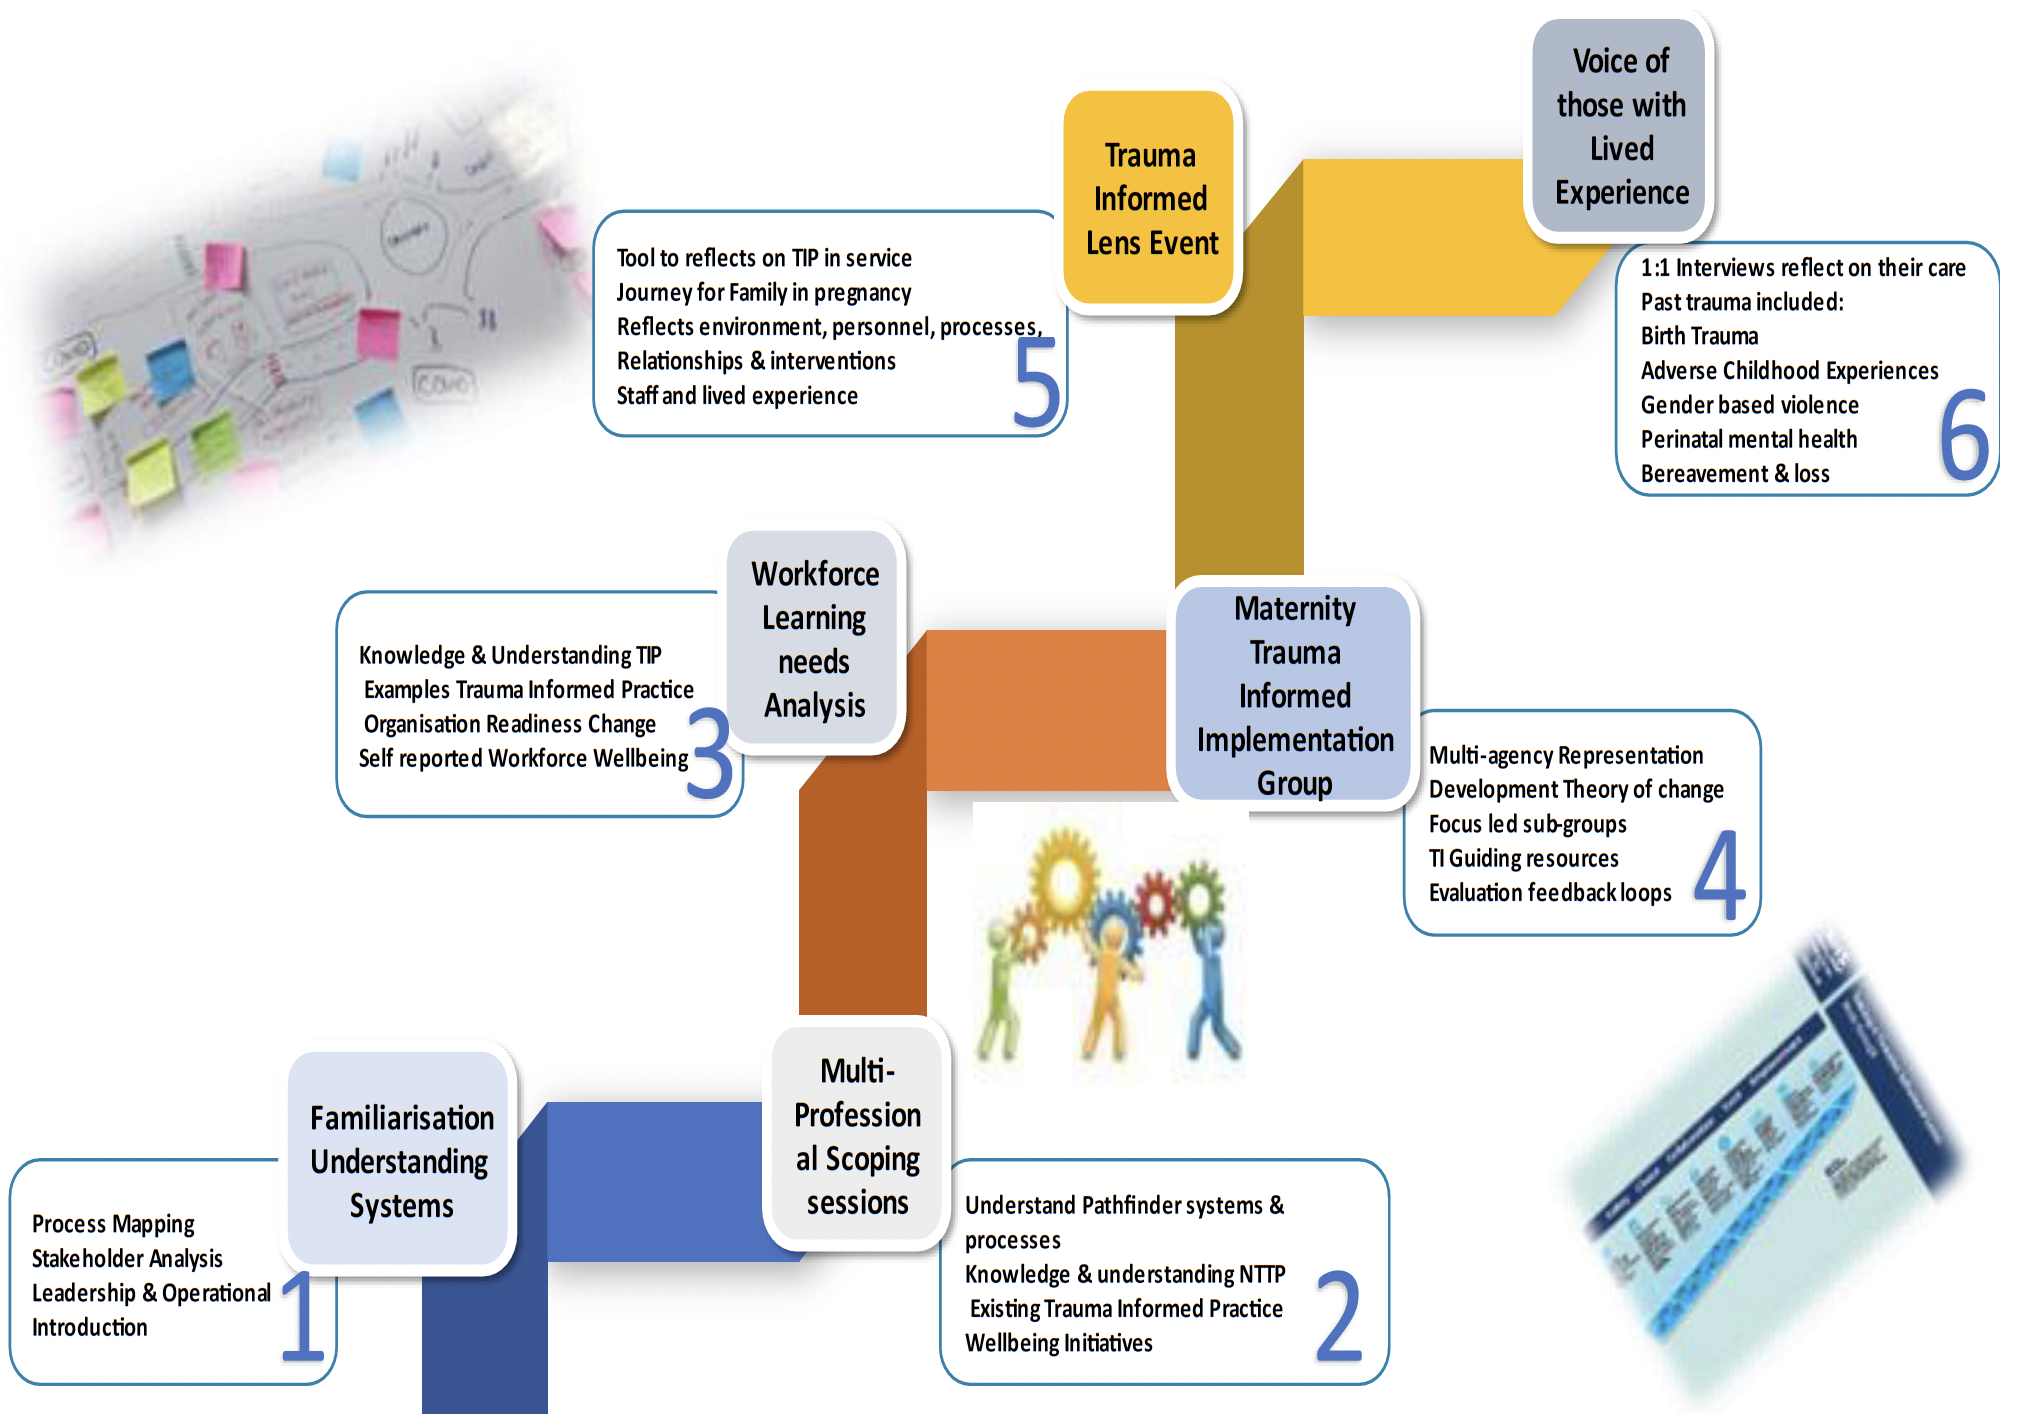 An image setting out the six steps required to understand the context and readiness for the transformation of a service to becoming trauma-informed. Under each of the six steps the tools and processes used to understand and assess the service’s readiness to change are listed. For example, process mapping, interviews with those with lived experience and understanding existing staff knowledge of the NTTP and TIP. The six steps are (1) understanding systems, (2) multi-profession scoping sessions,(3) workforce learning needs analysis, (4) Maternity Trauma-informed Implementation Group, (5) Trauma-informed lens event and (6) voice of those with lived experience. 